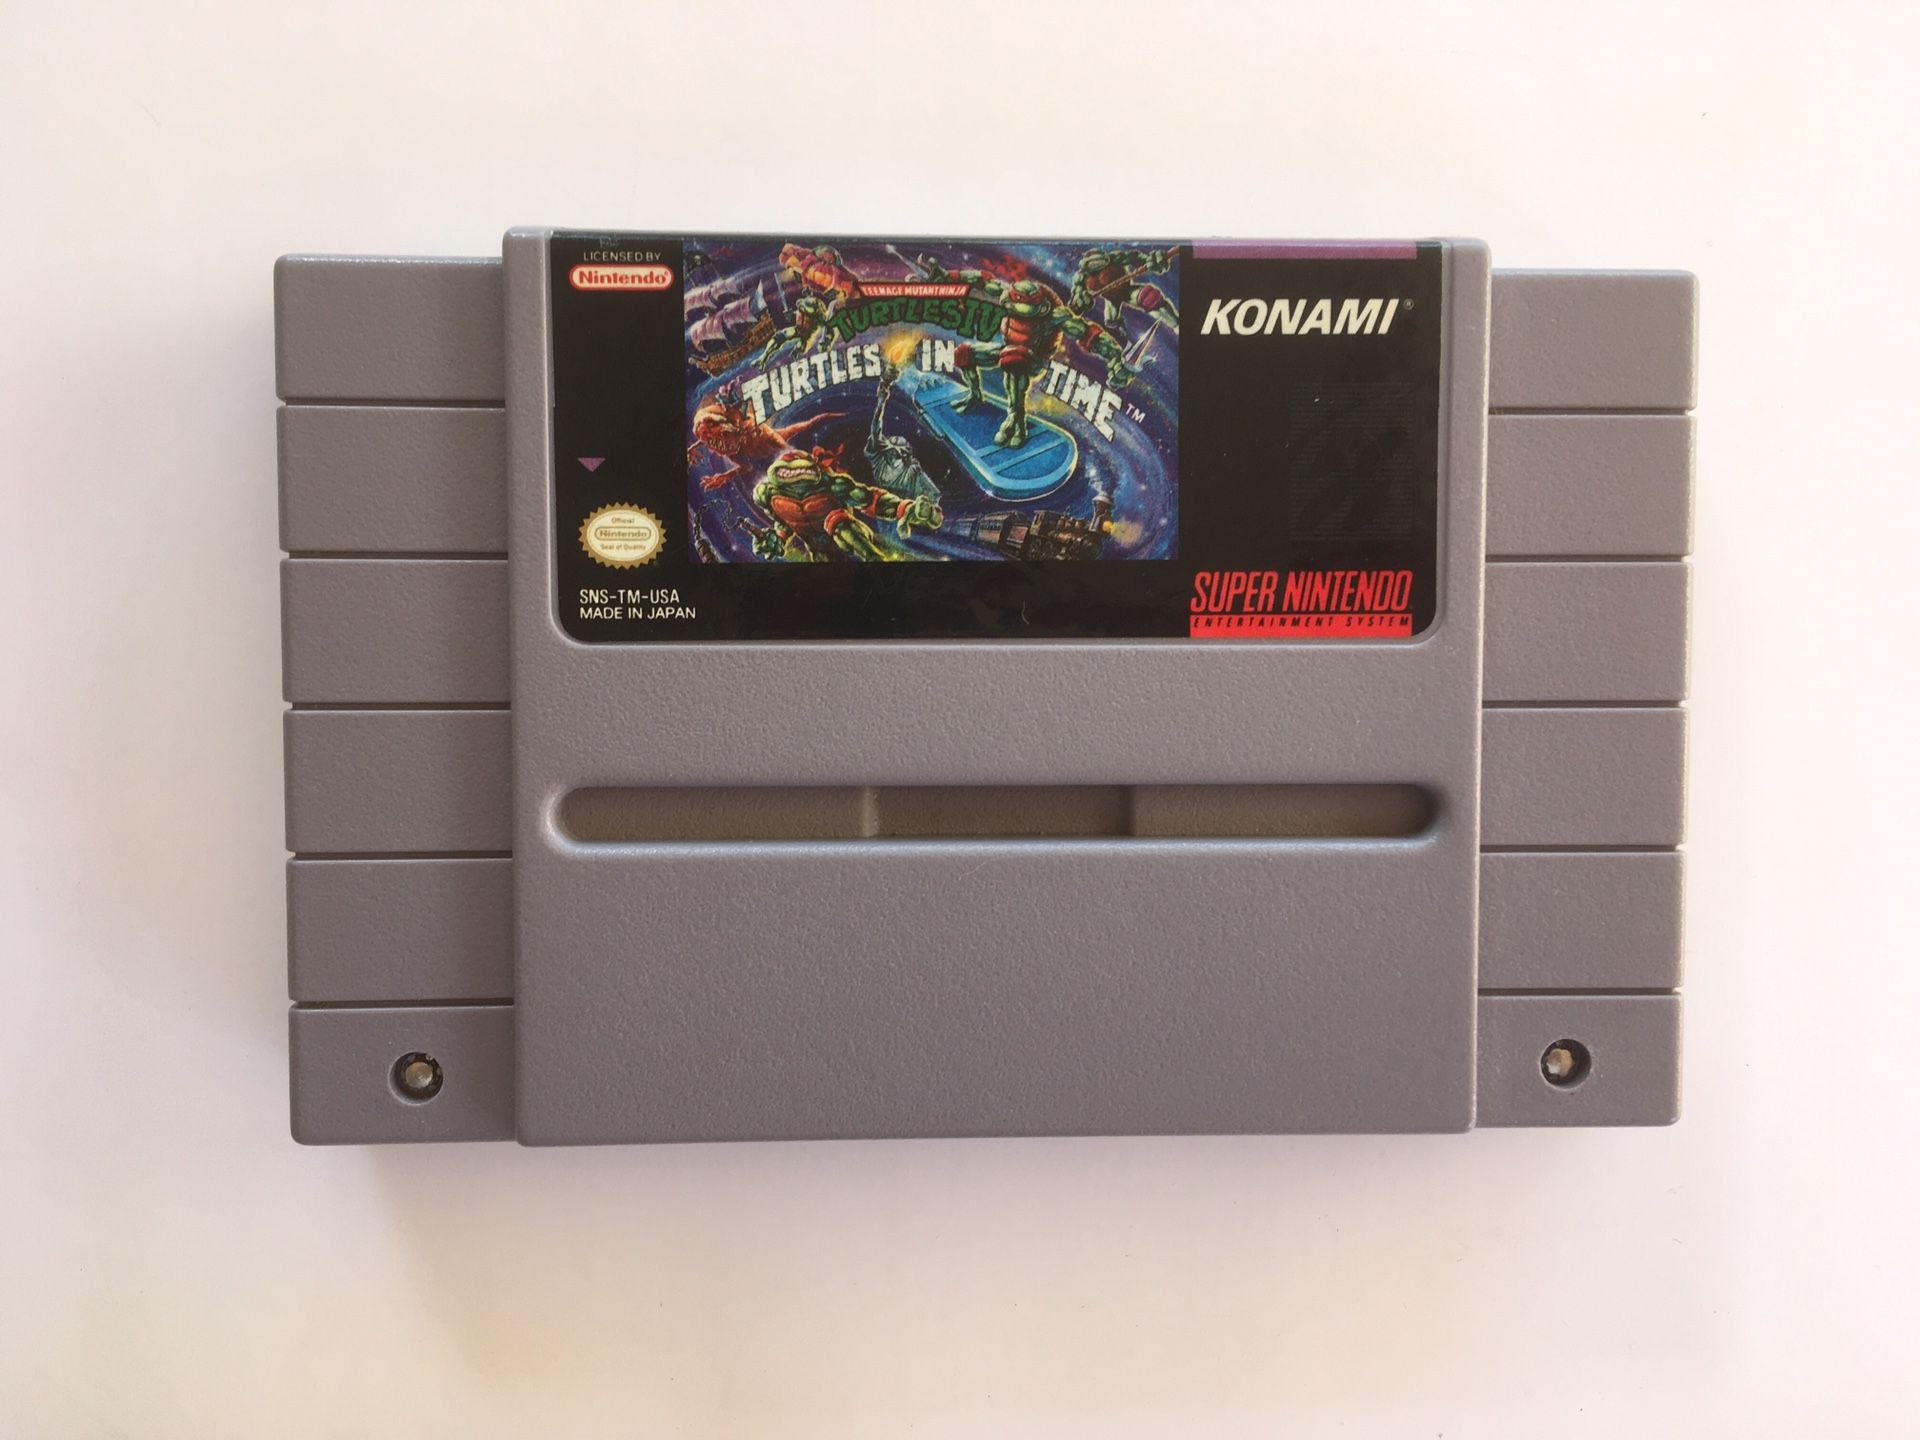 Turtles in time for snes